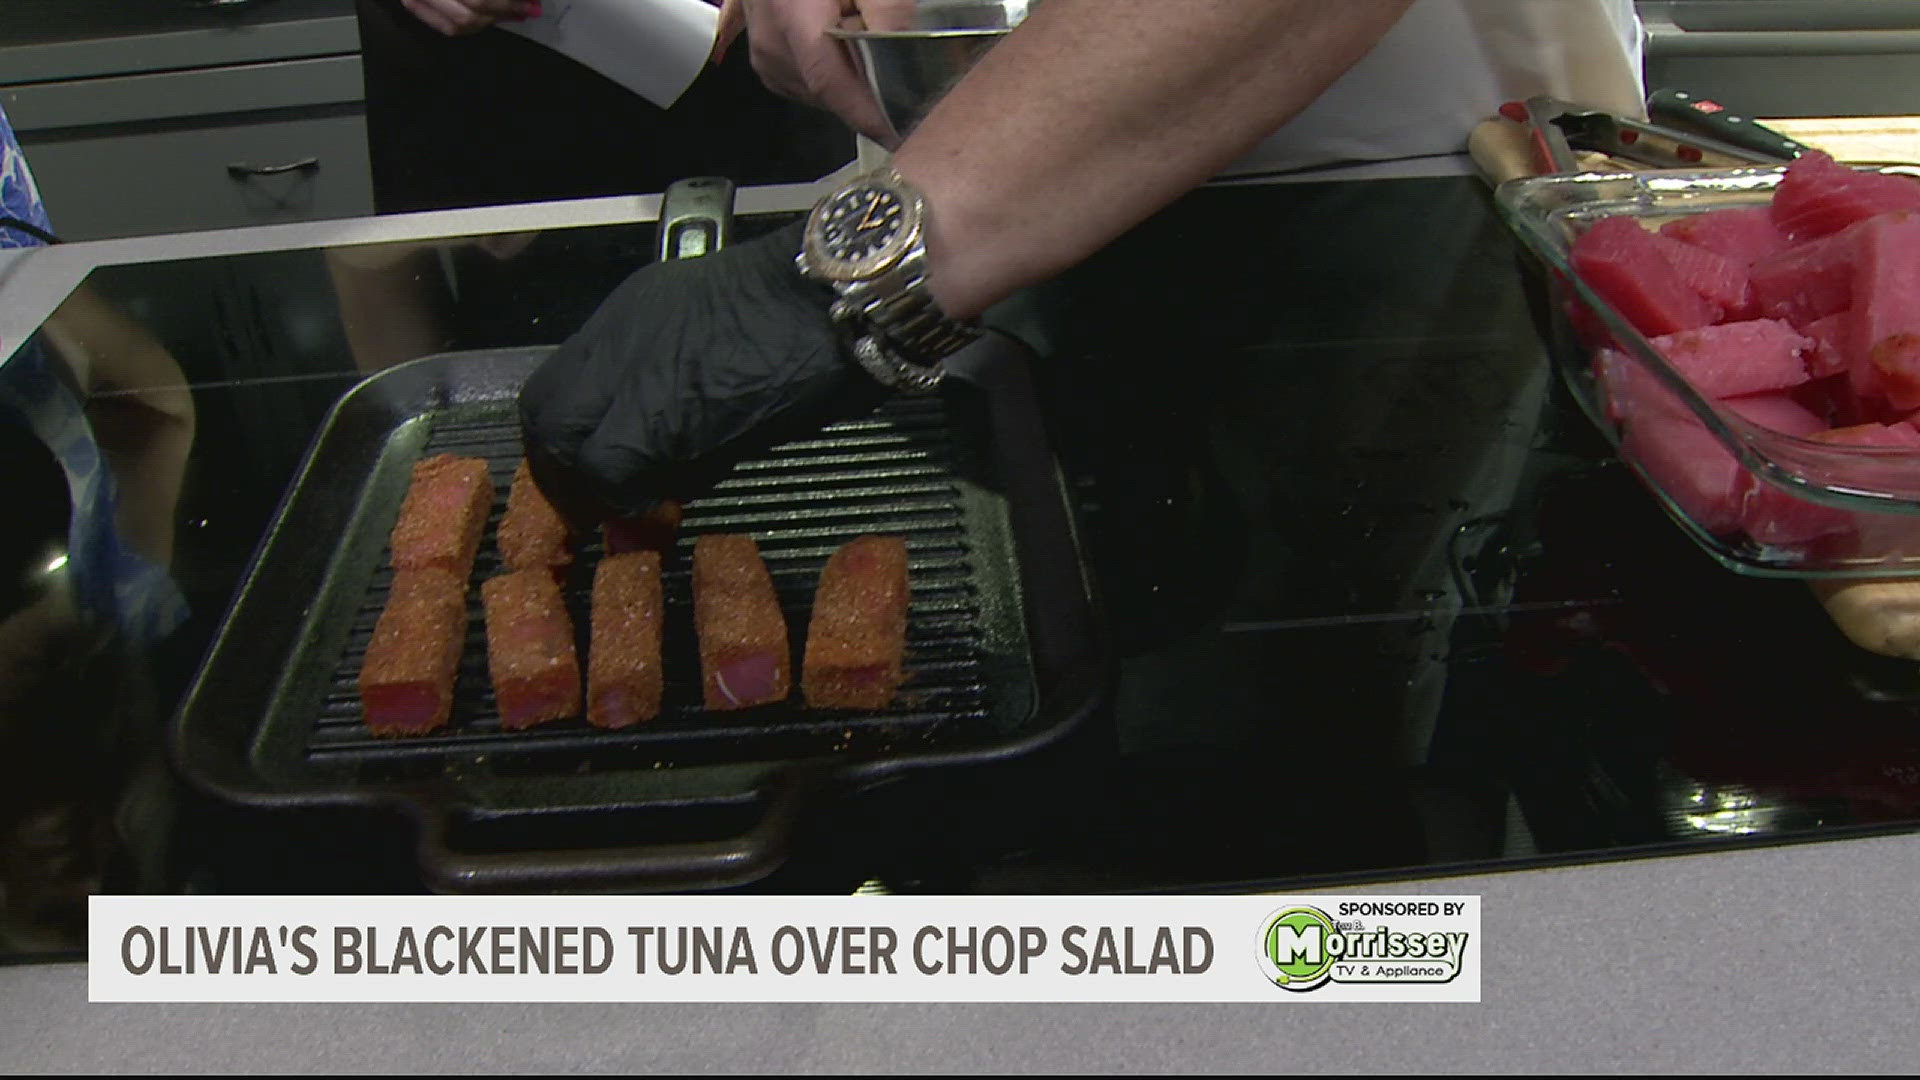 The team cooked up a blackened tuna steak served over a chop salad. You can check out the recipe below.